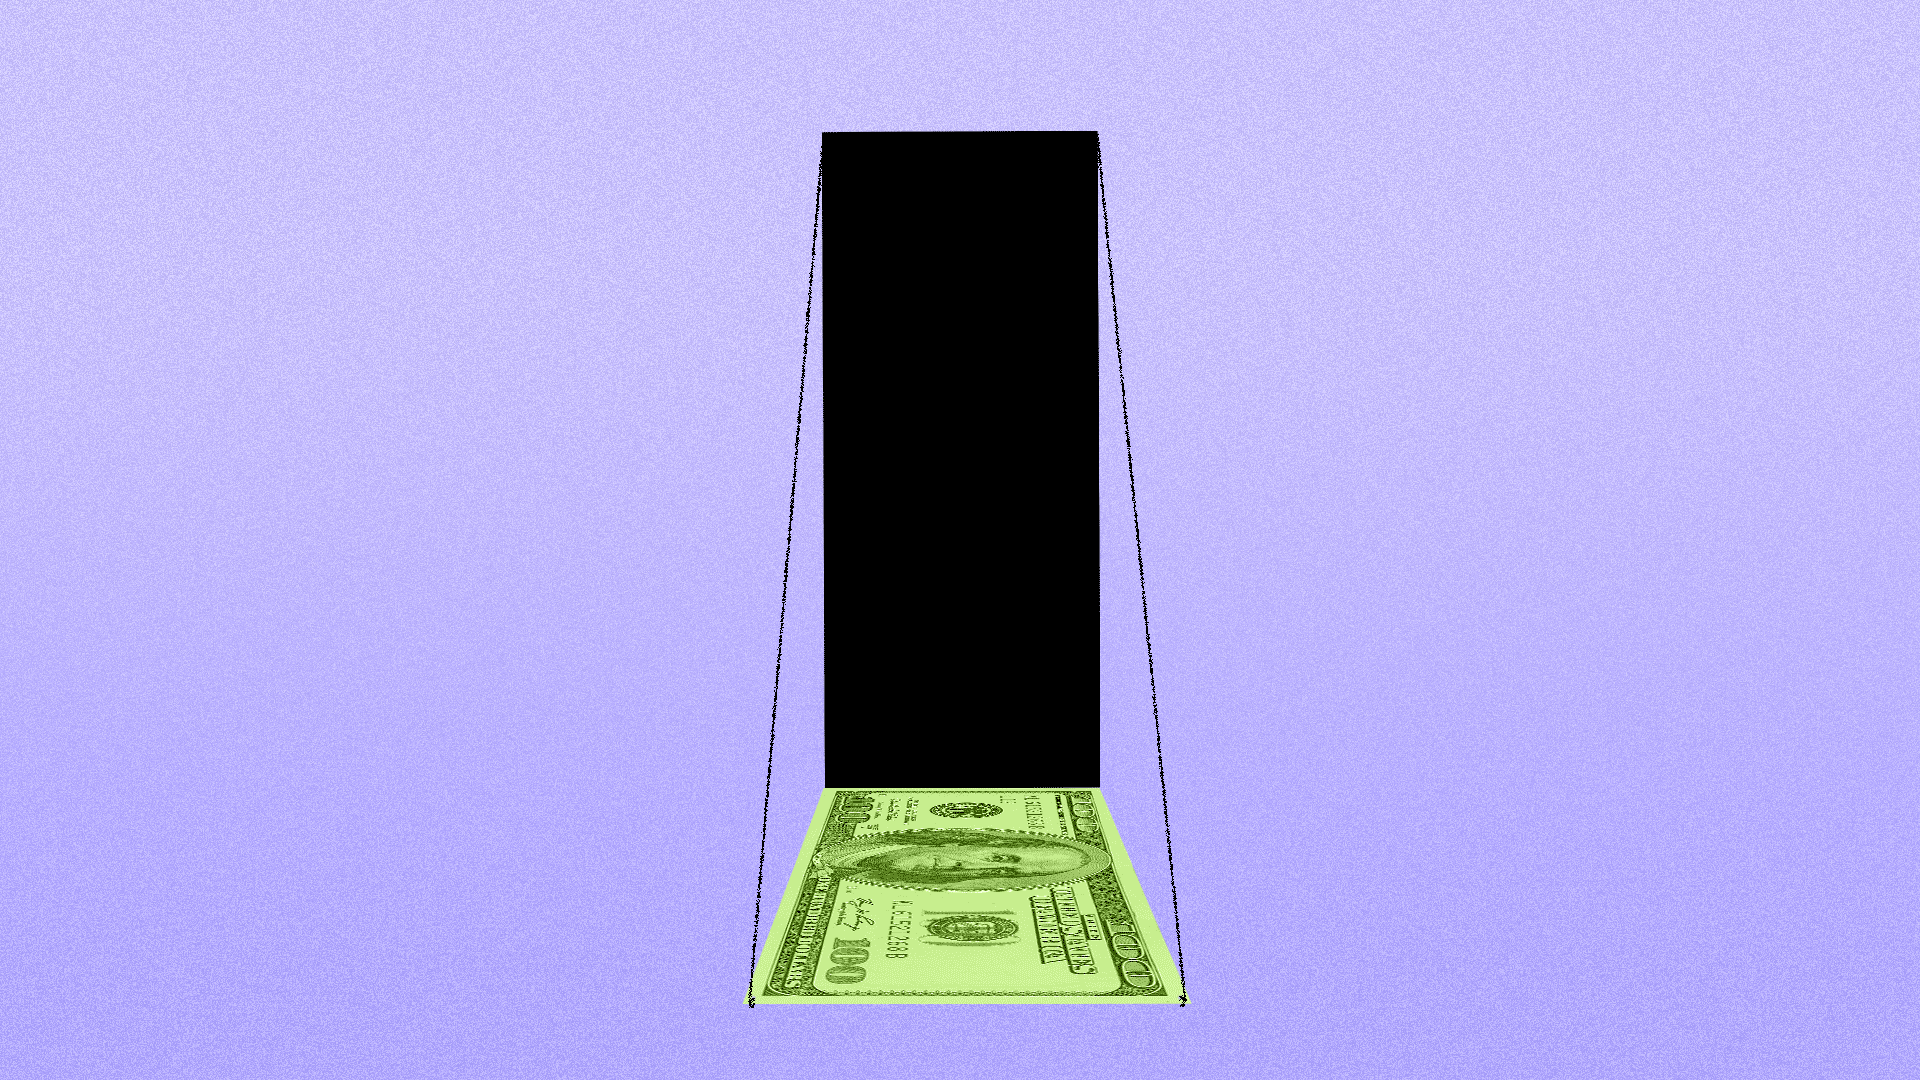  Animated illustration of a drawbridge made out of a hundred dollar note being pulled up.